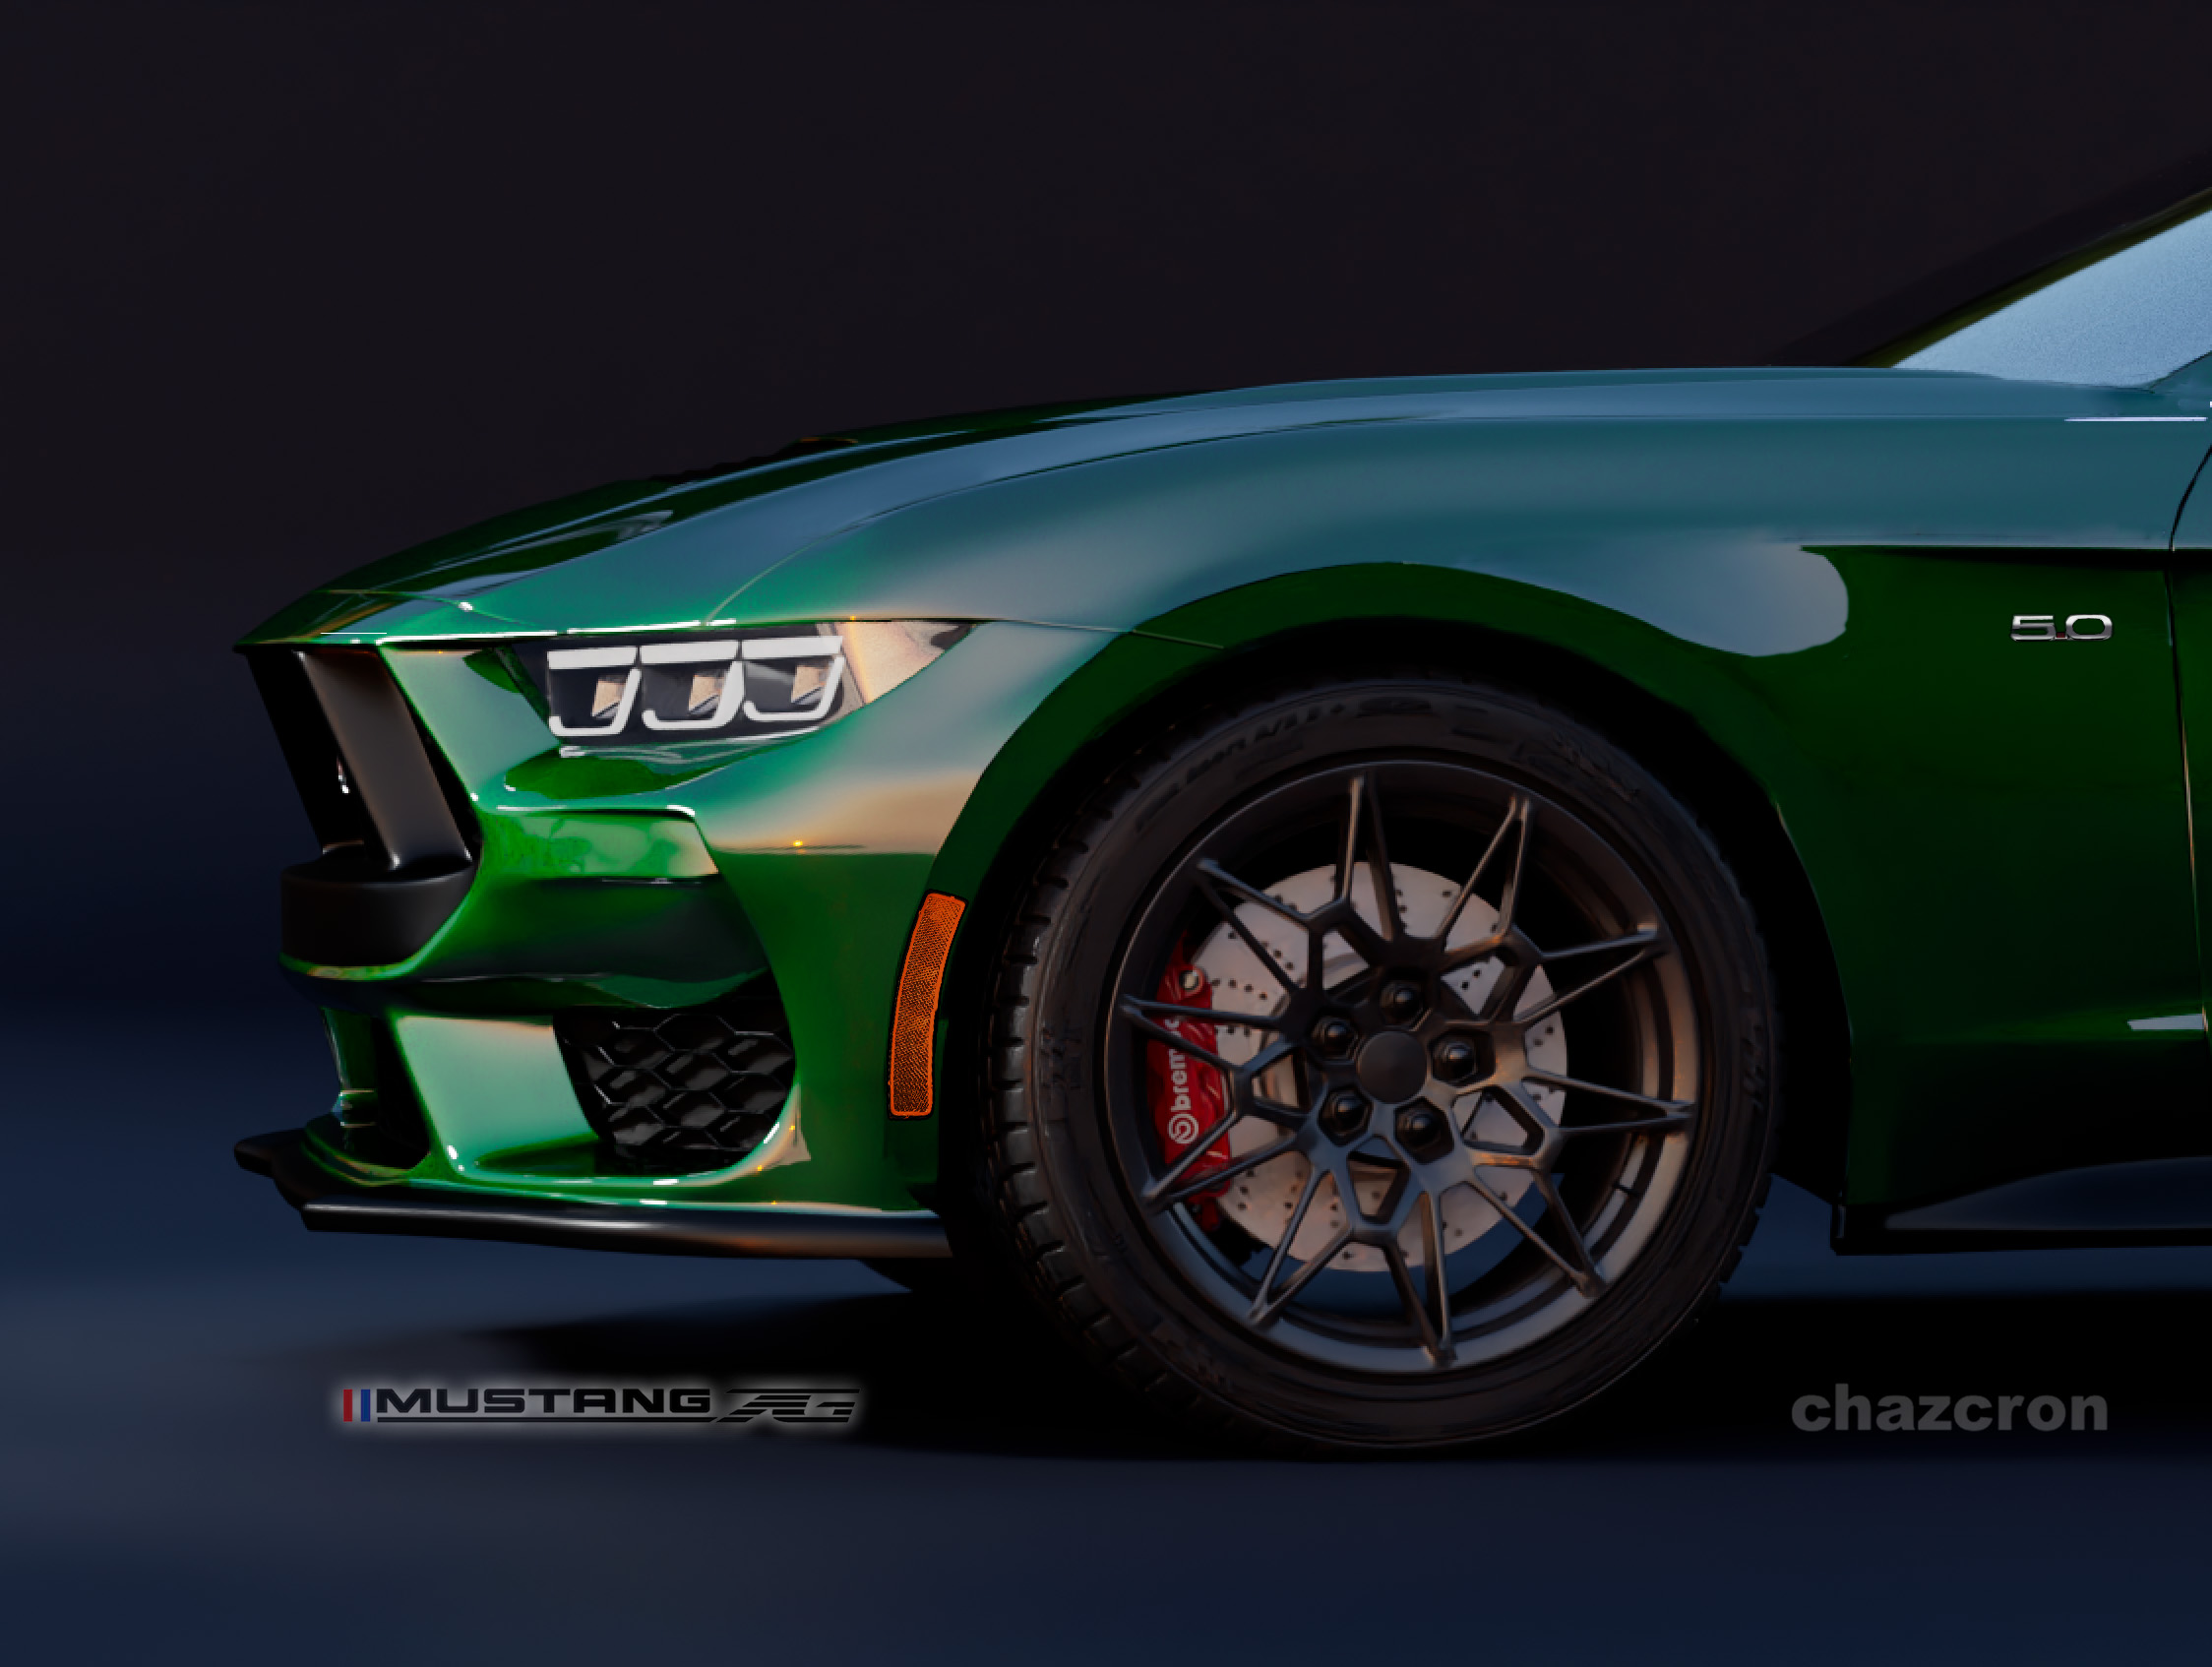 S650 Mustang chazcron weighs in... 7th gen 2023 Mustang S650 3D model & renderings in several colors! New Stance